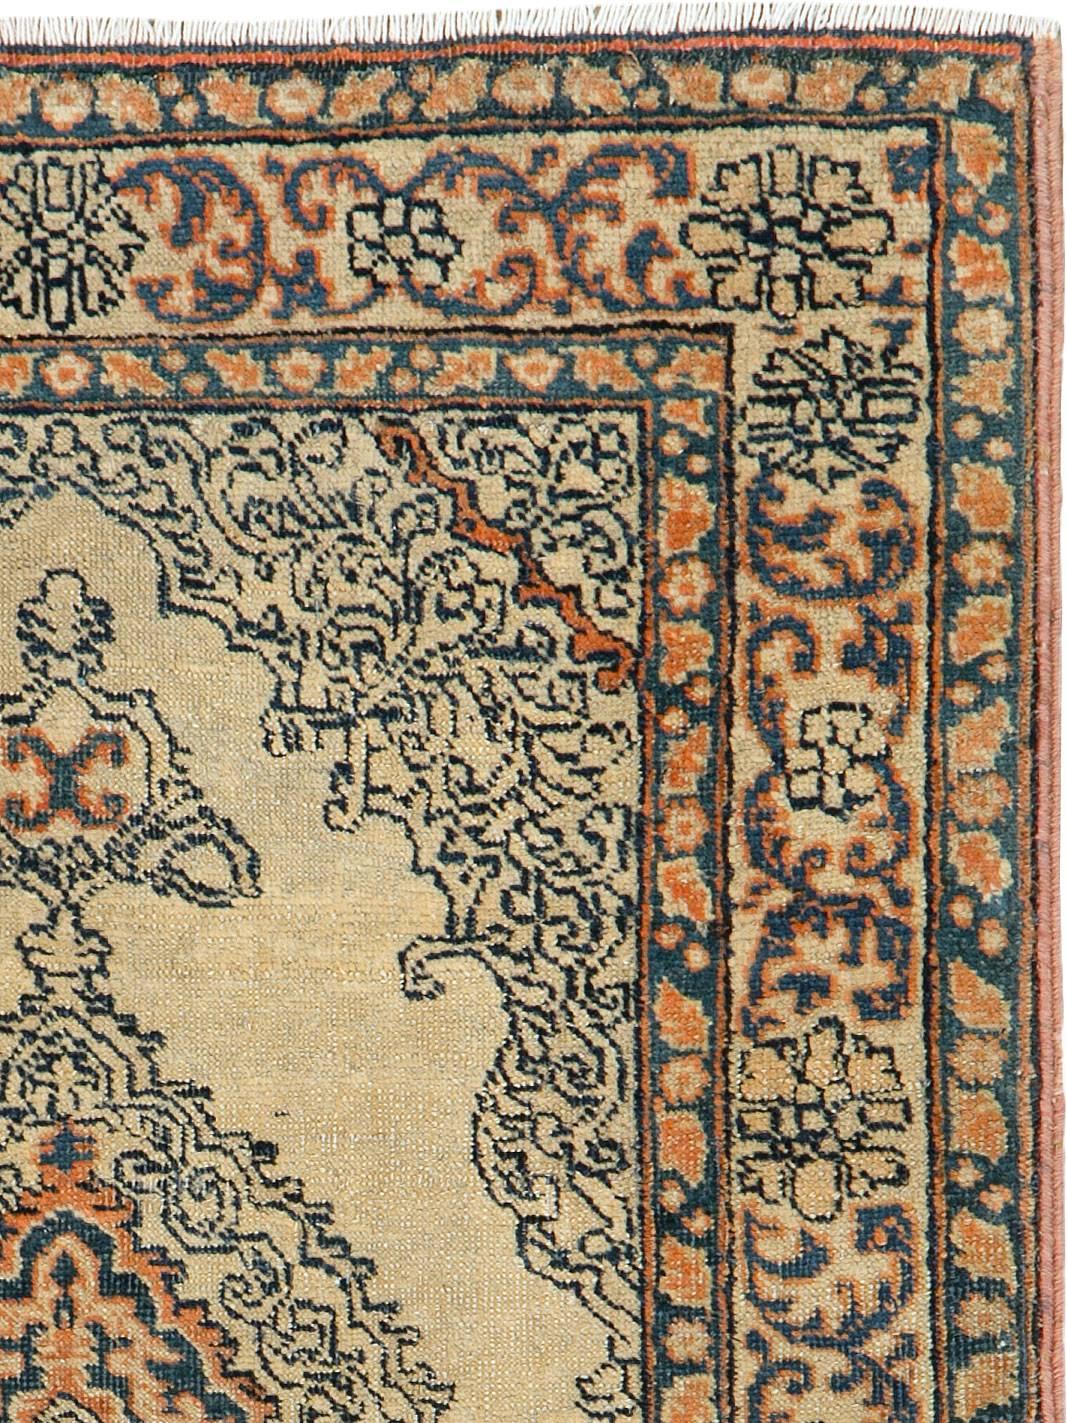 An antique Persian Tabriz carpet from the first quarter of the 20th century woven in the prominent workshop of Haji Jalili.